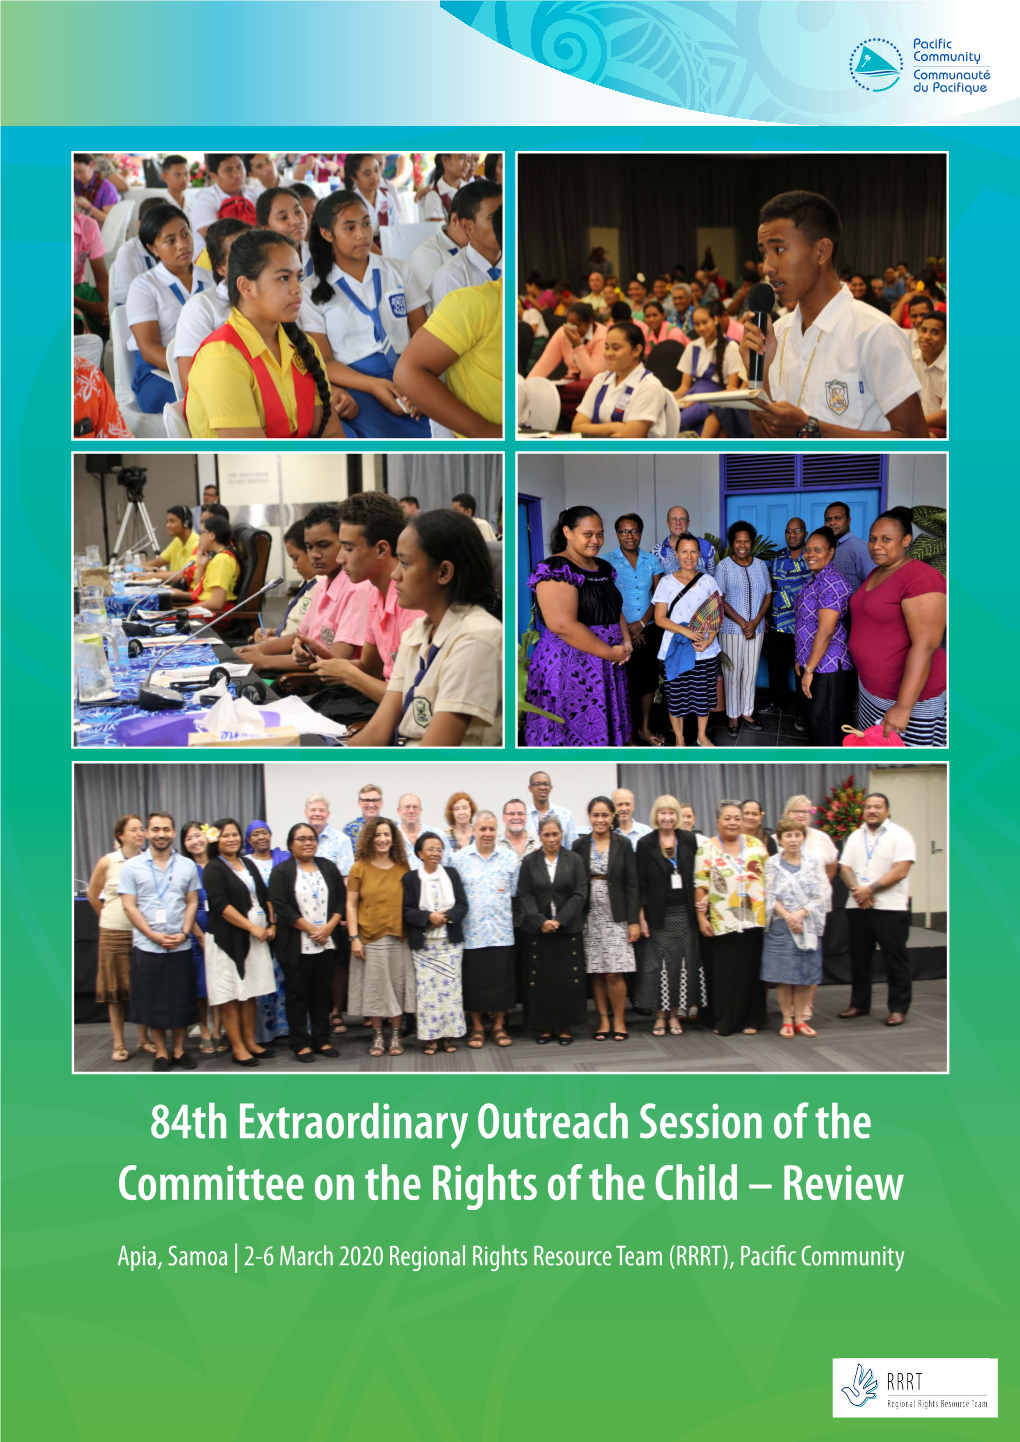 84Th Extraordinary Outreach Session of the Committee on the Rights of the Child – Review